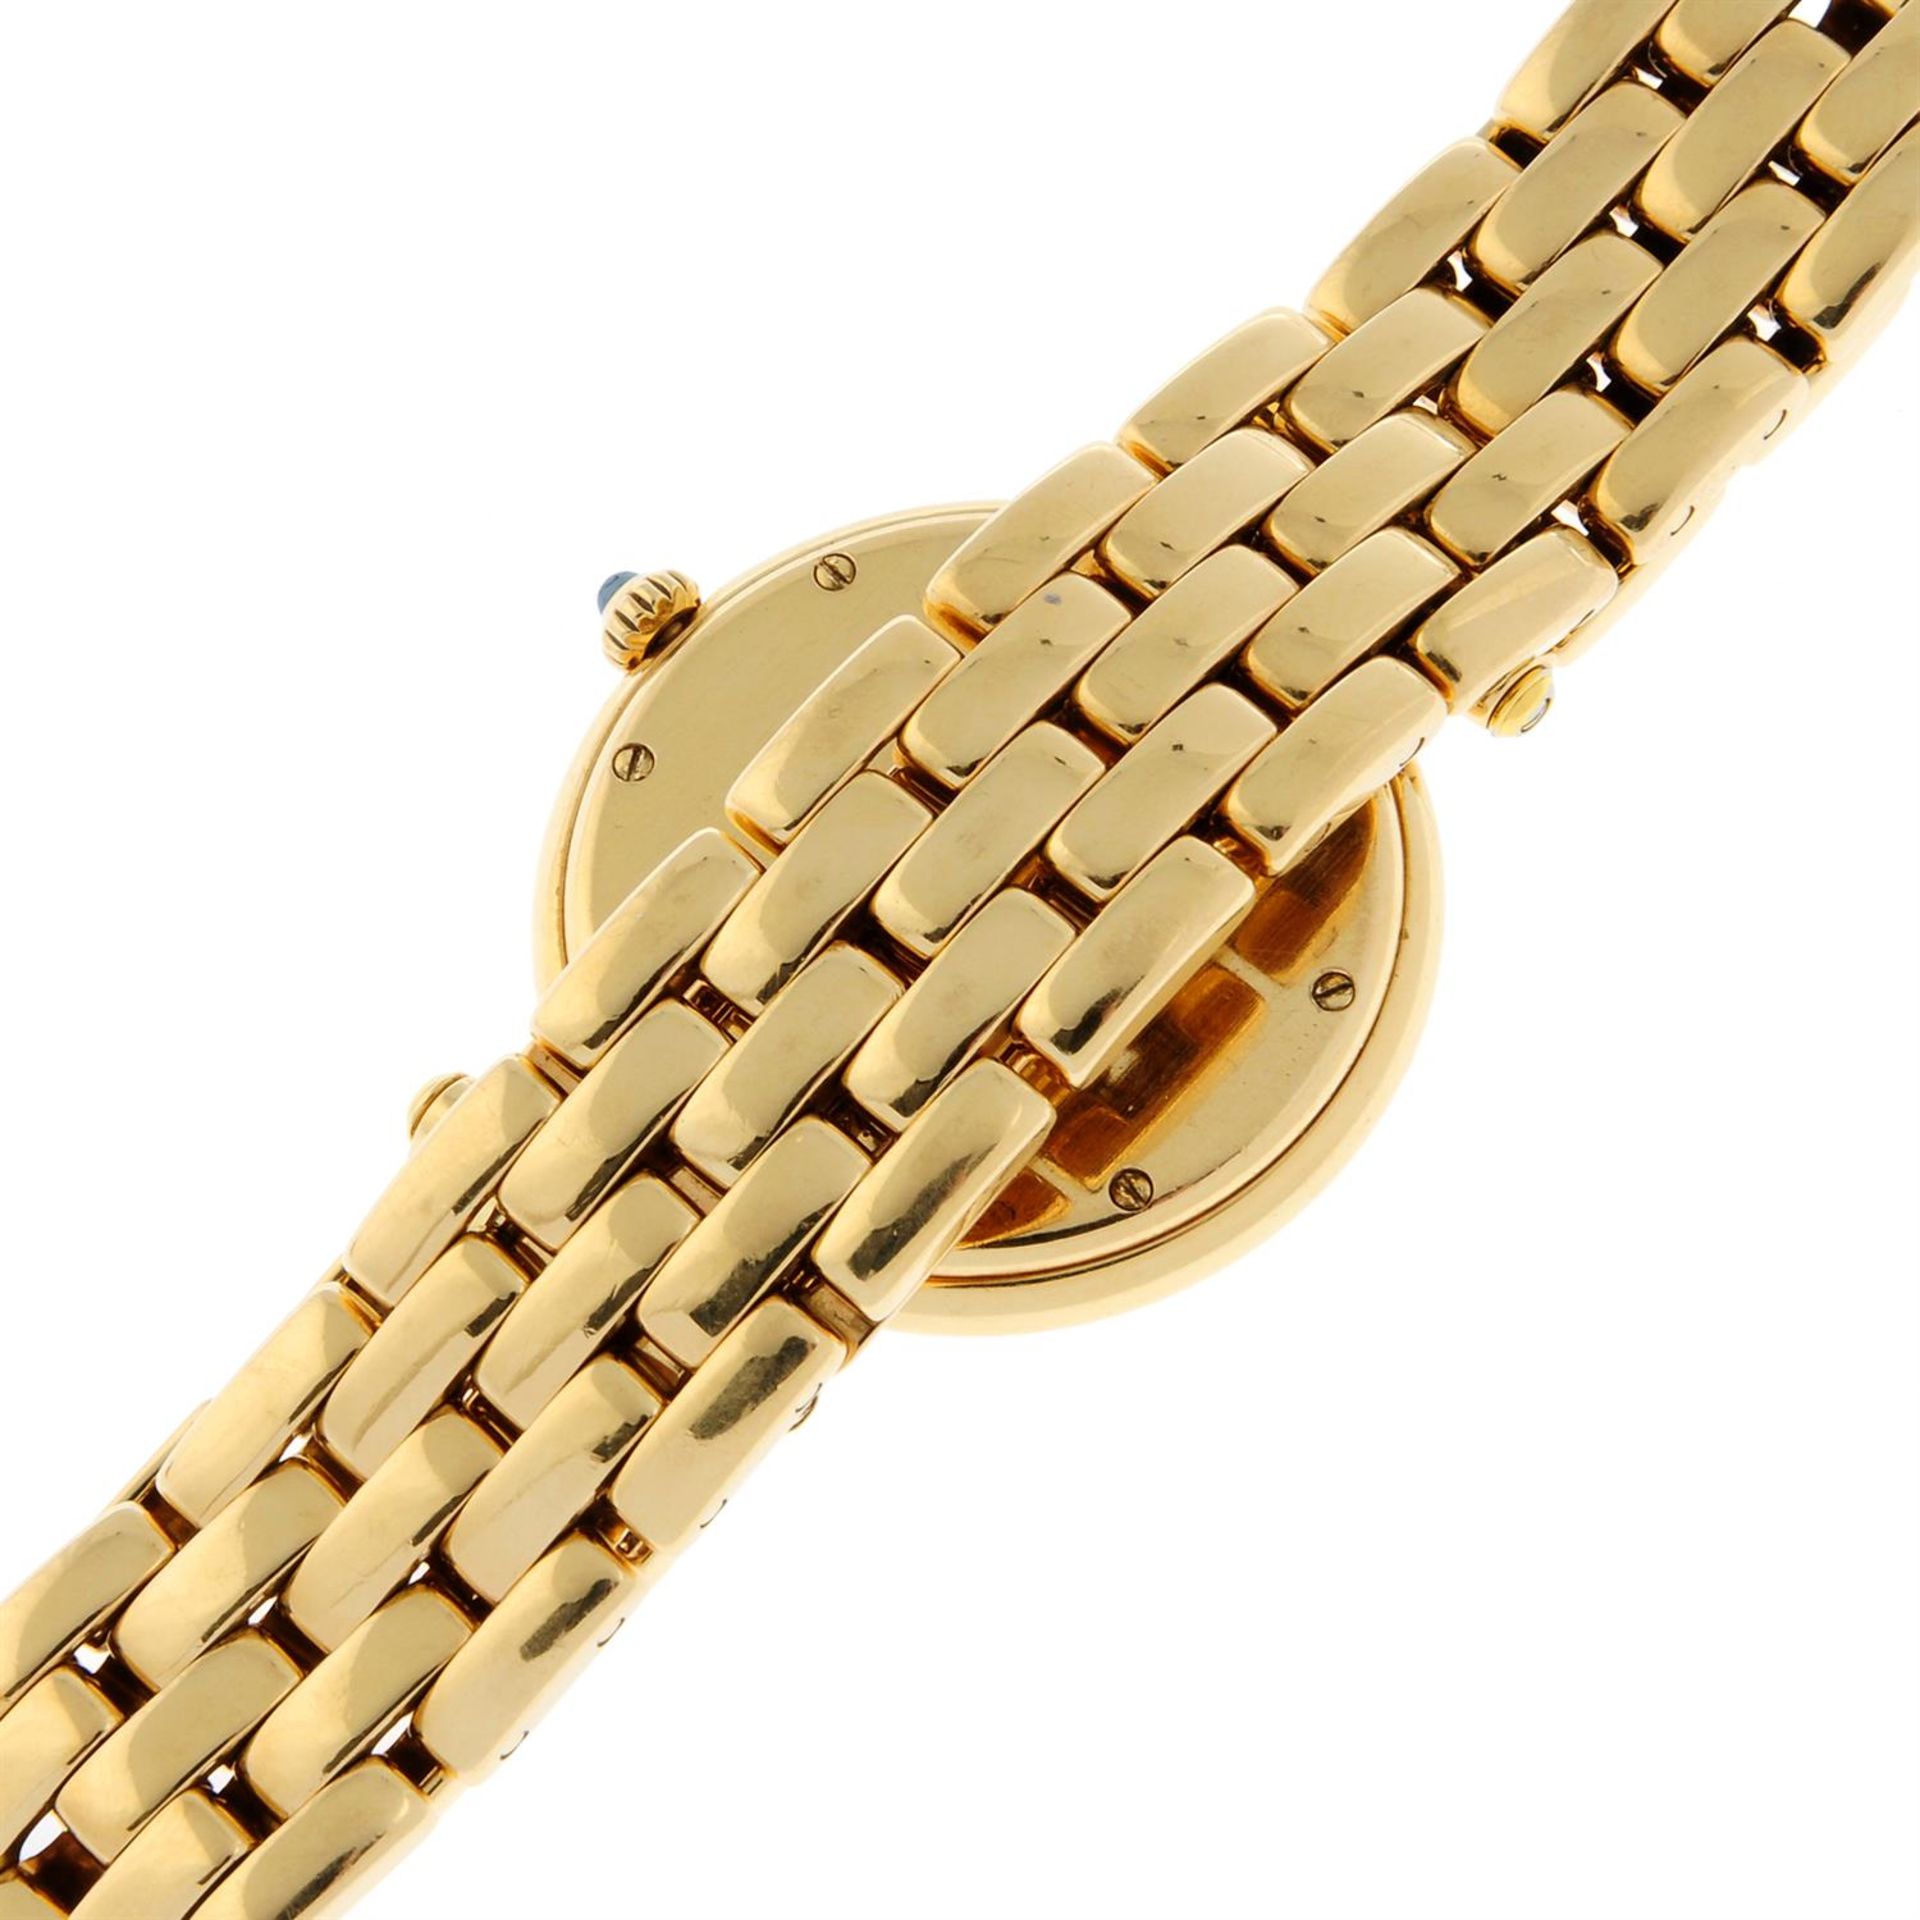 CARTIER - a 18ct gold Panthere Vendome bracelet watch, 24mm. - Image 2 of 6